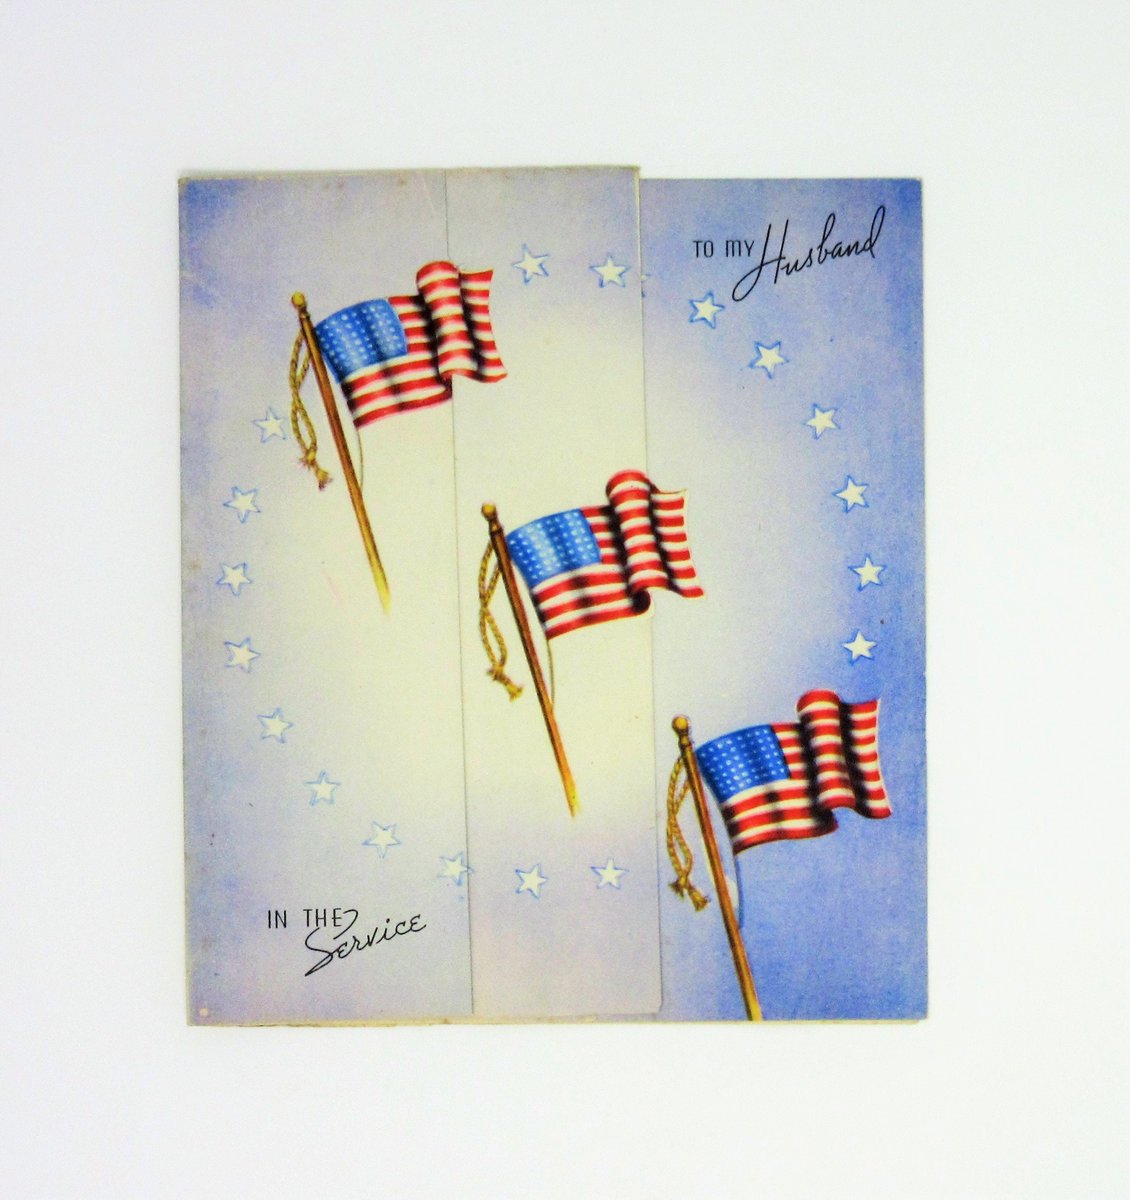 Vintage Unused Military Greeting Card To My Husband in the Service Featuring American Flags, Patriotic Colors, and a Sweet Message Americana tuppu.net/af0db1c9 #vintage #Etsy #etsyseller #VintageMilitary